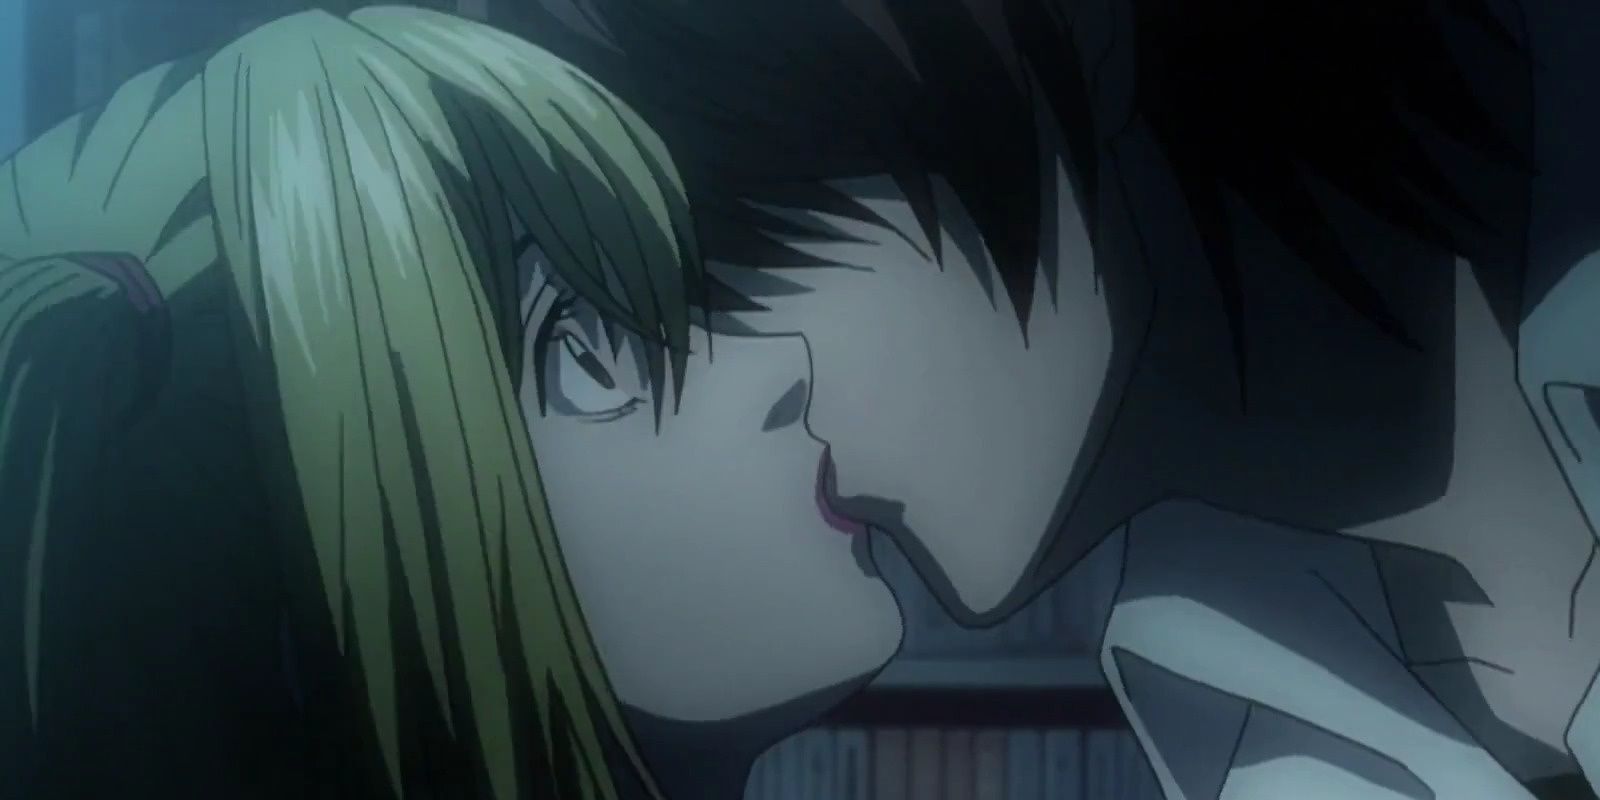 Misa and Light from Death Note Kiss